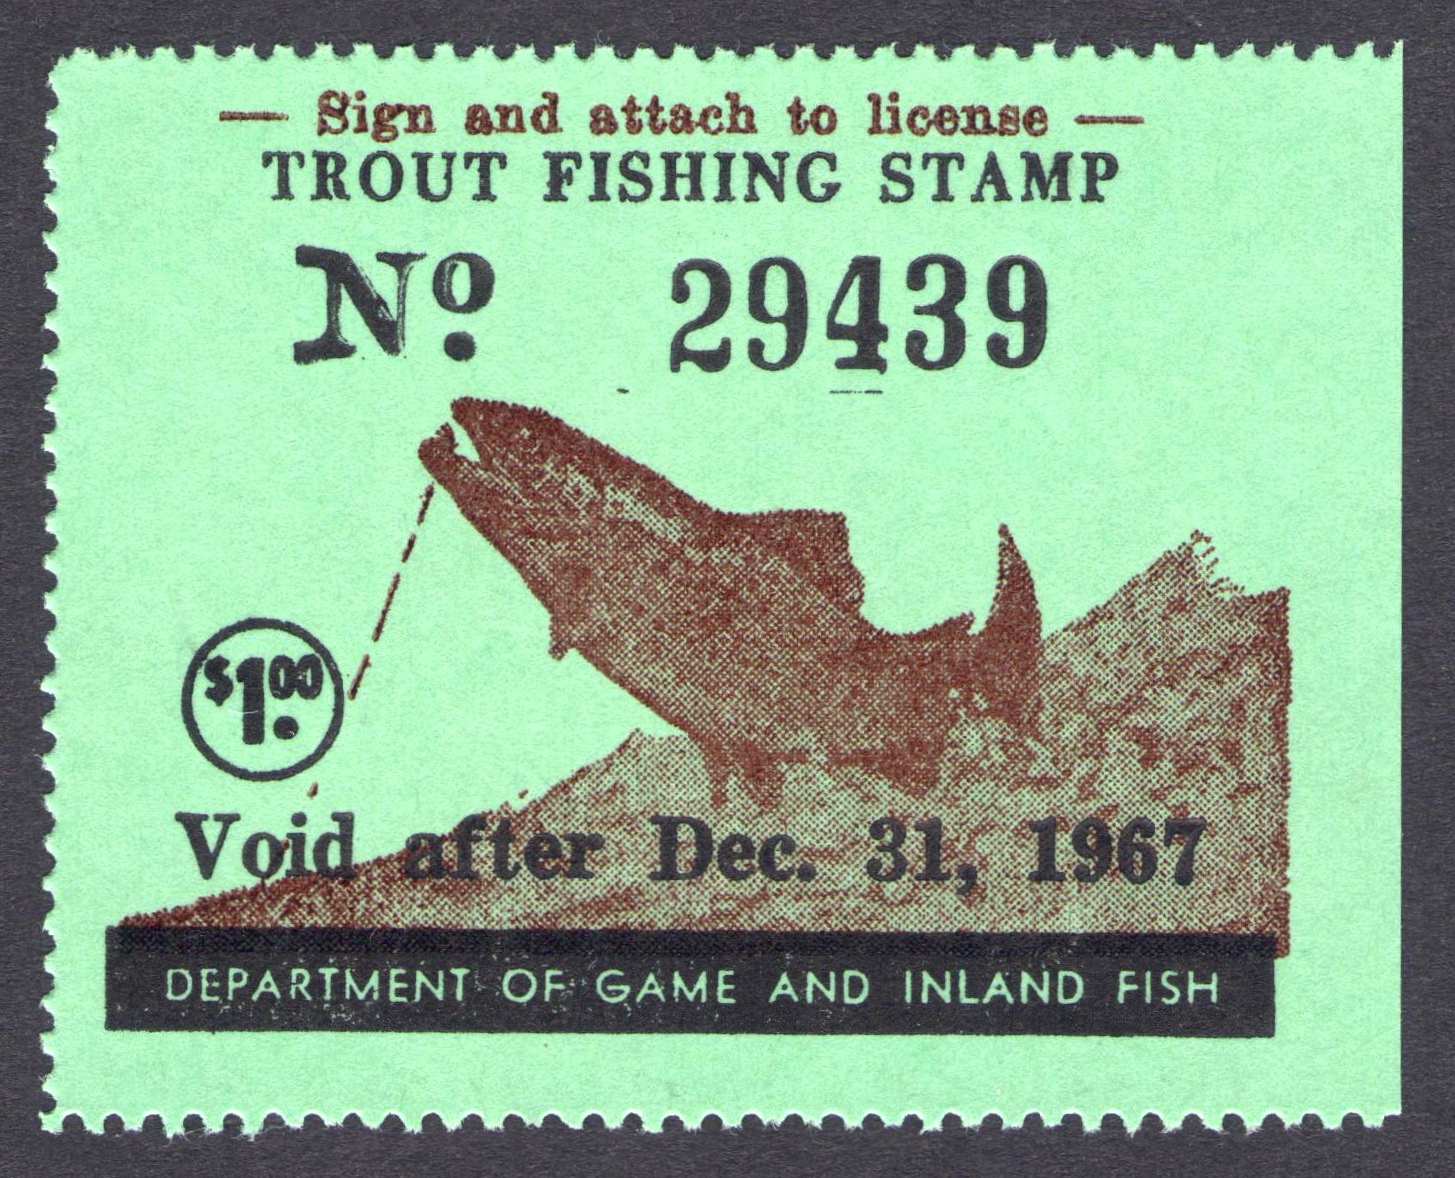 1967 Maryland Trout